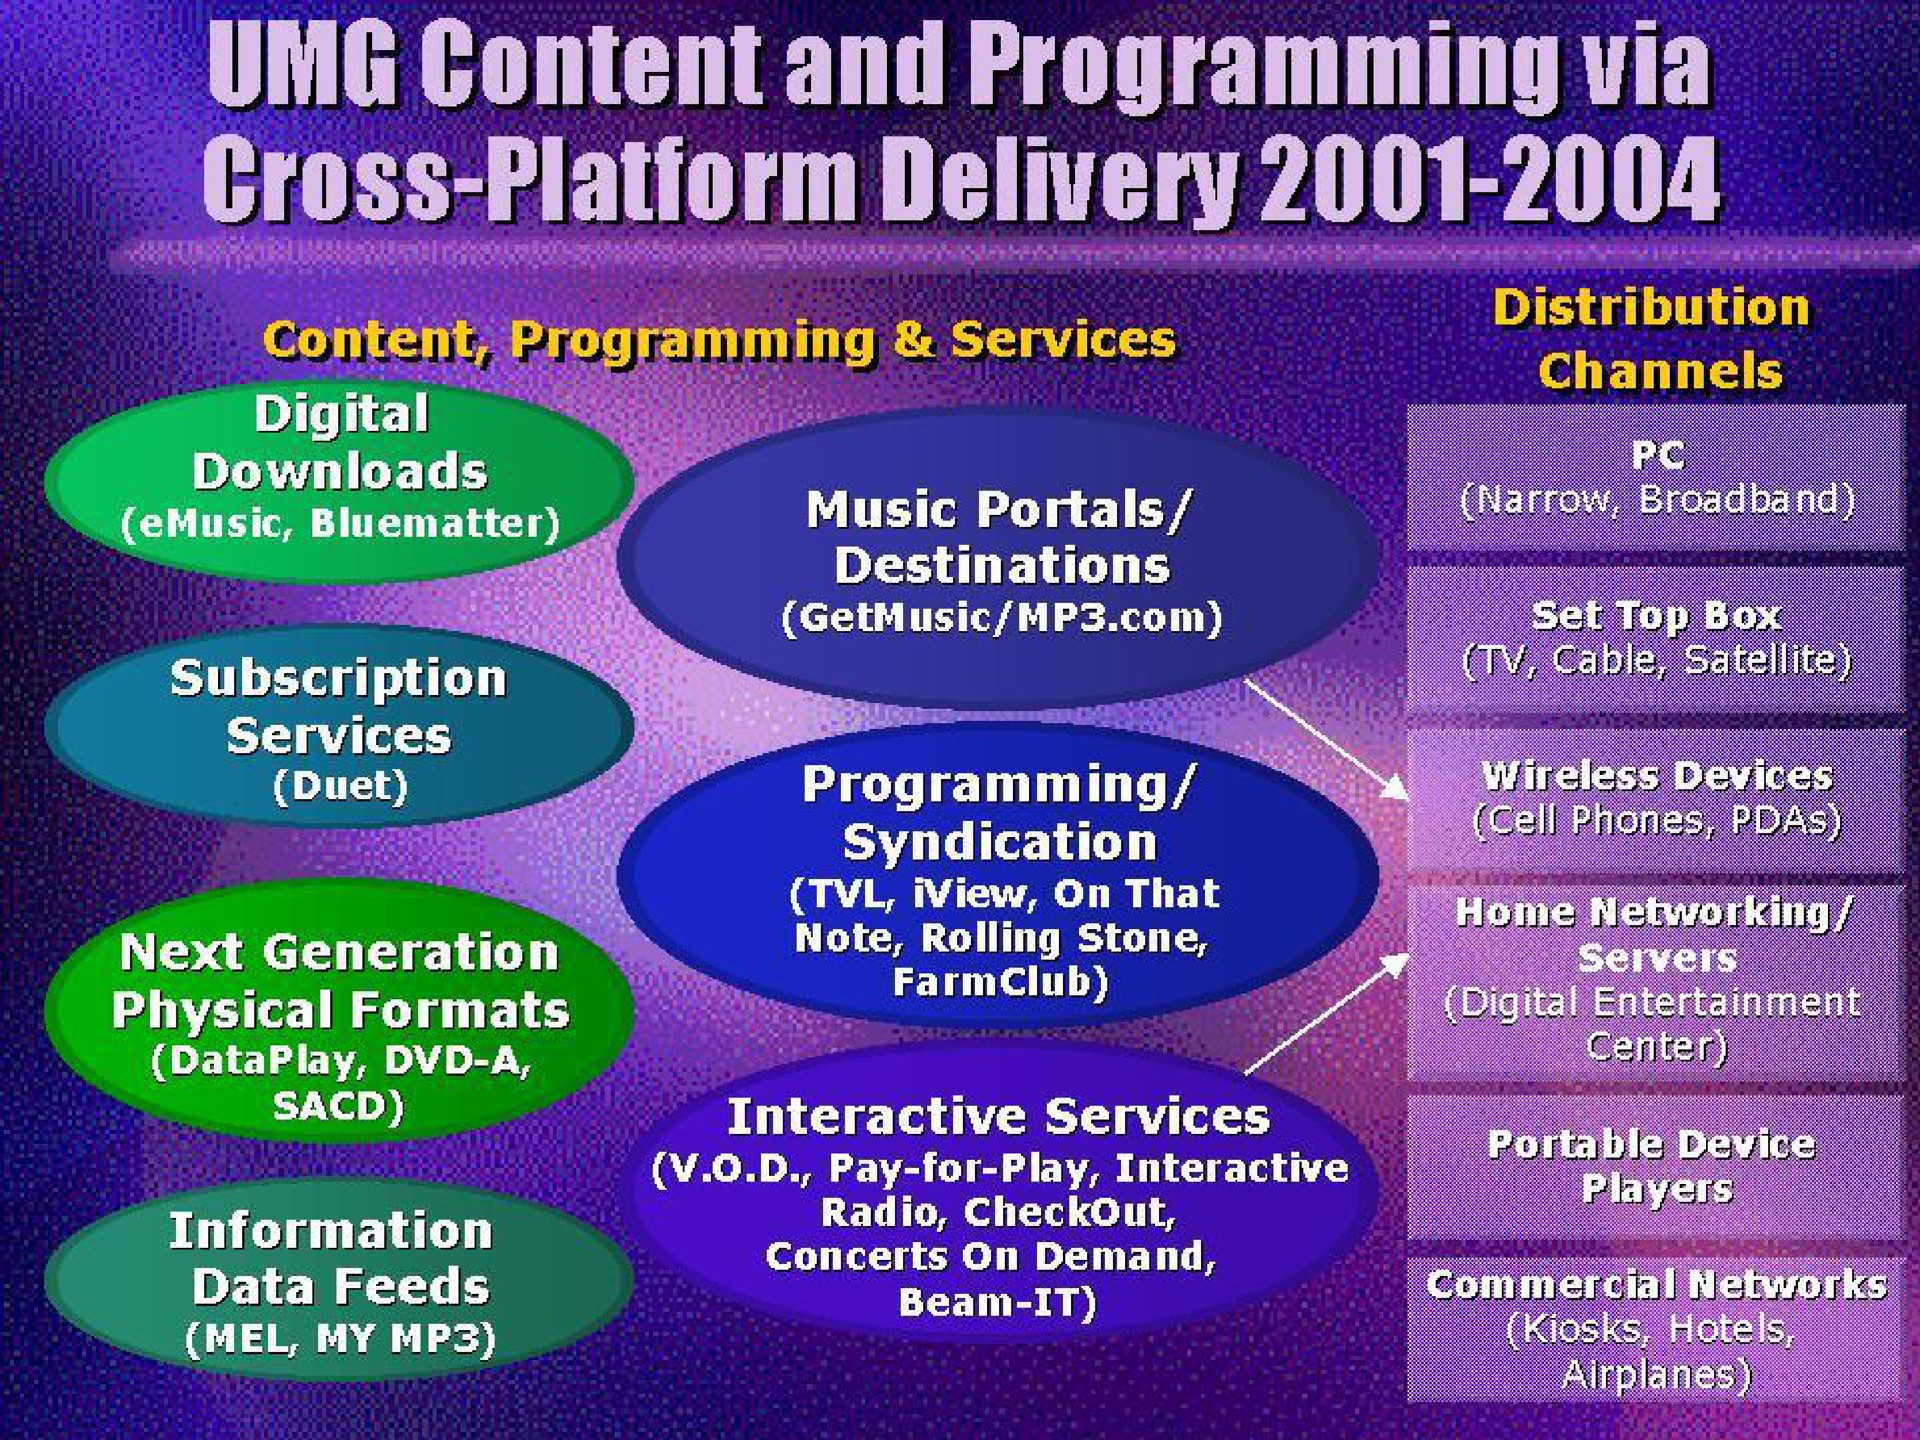 content and programming via paths next generation physical formats data feeds mel my interactive services beam it | Universal Music Group